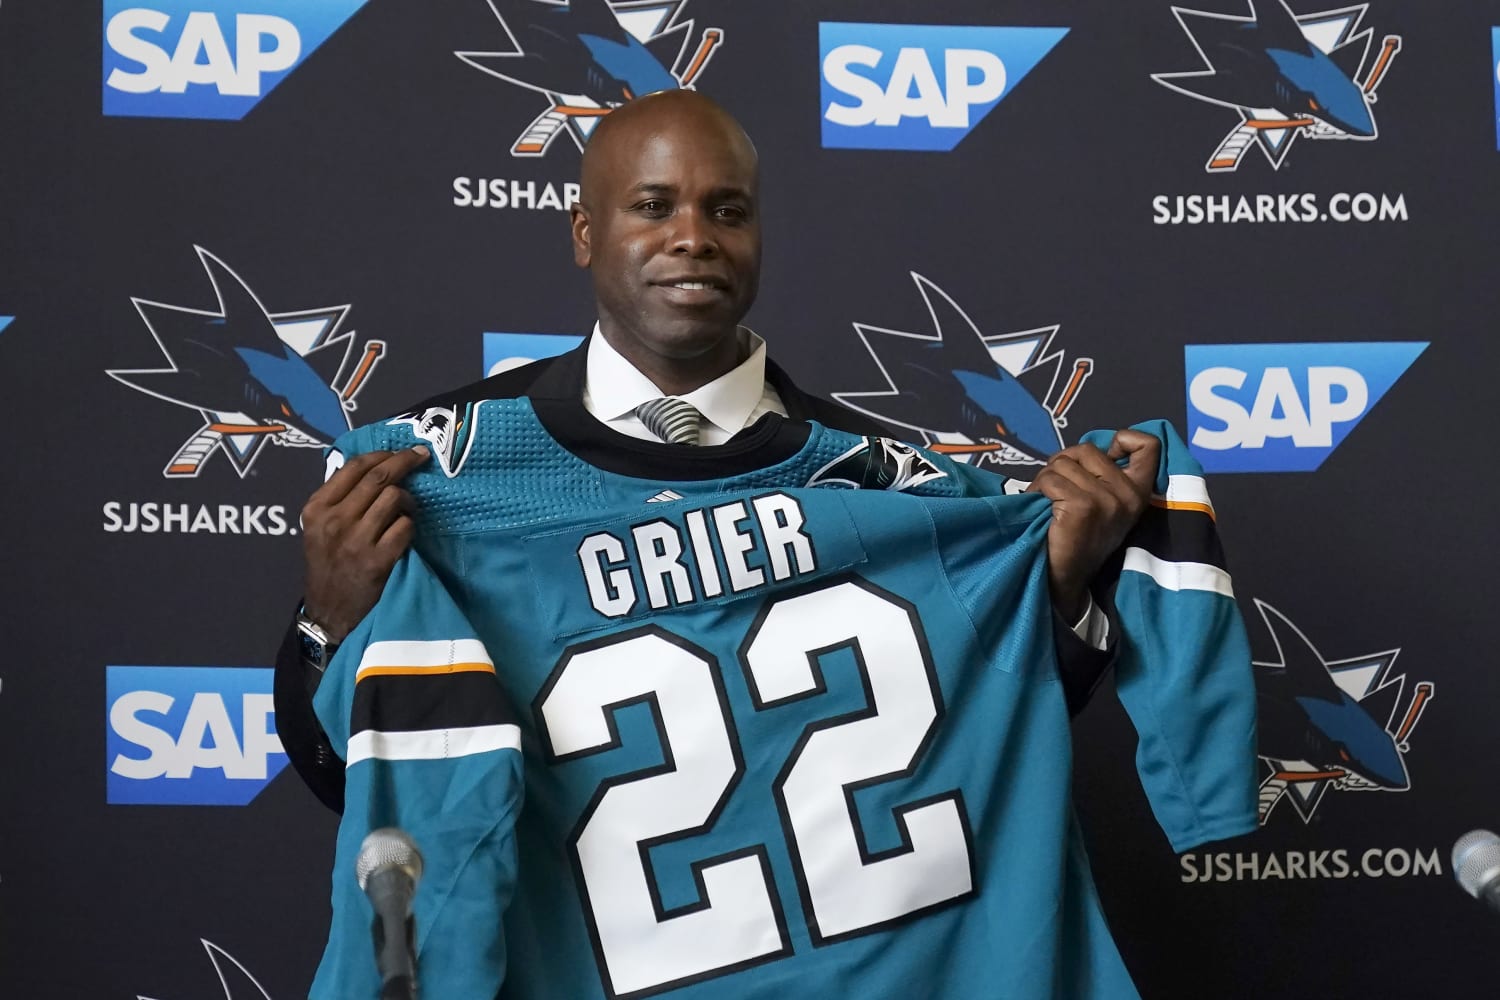 Mike Grier becomes first Black general manager in NHL history - KESQ